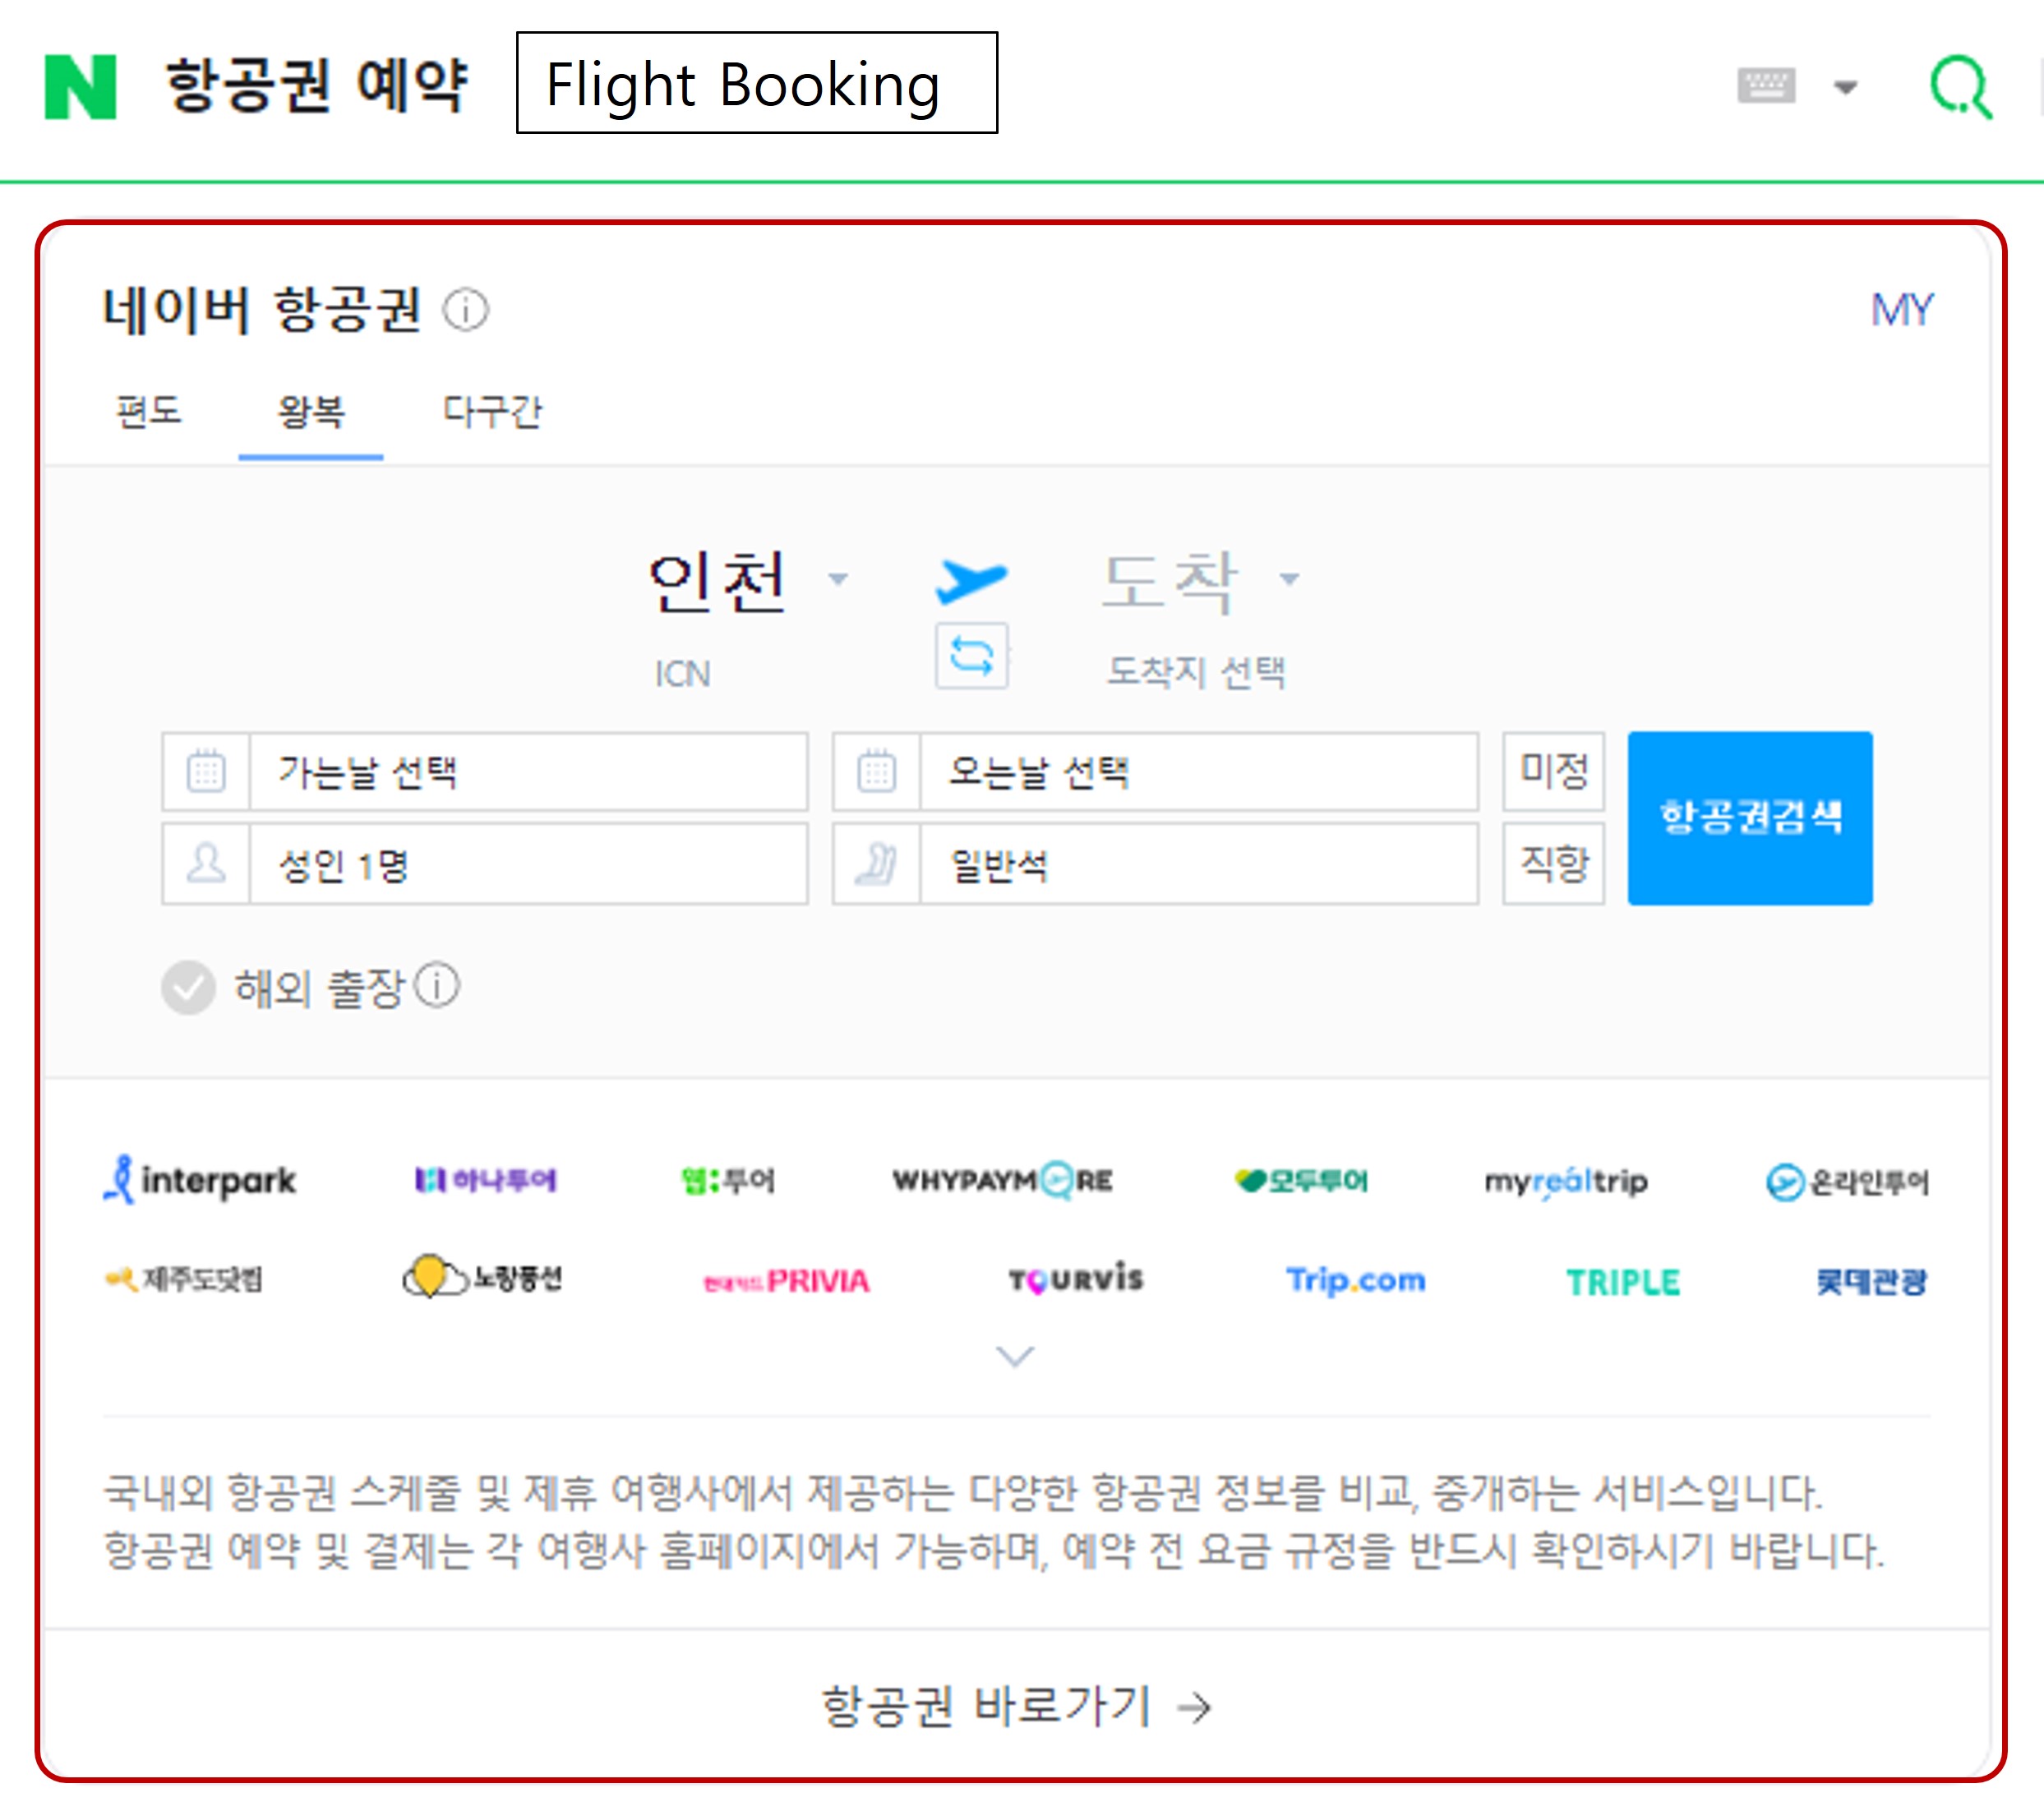 Searching Flight Booking on Naver will spawn a featured snippet from Naver flight